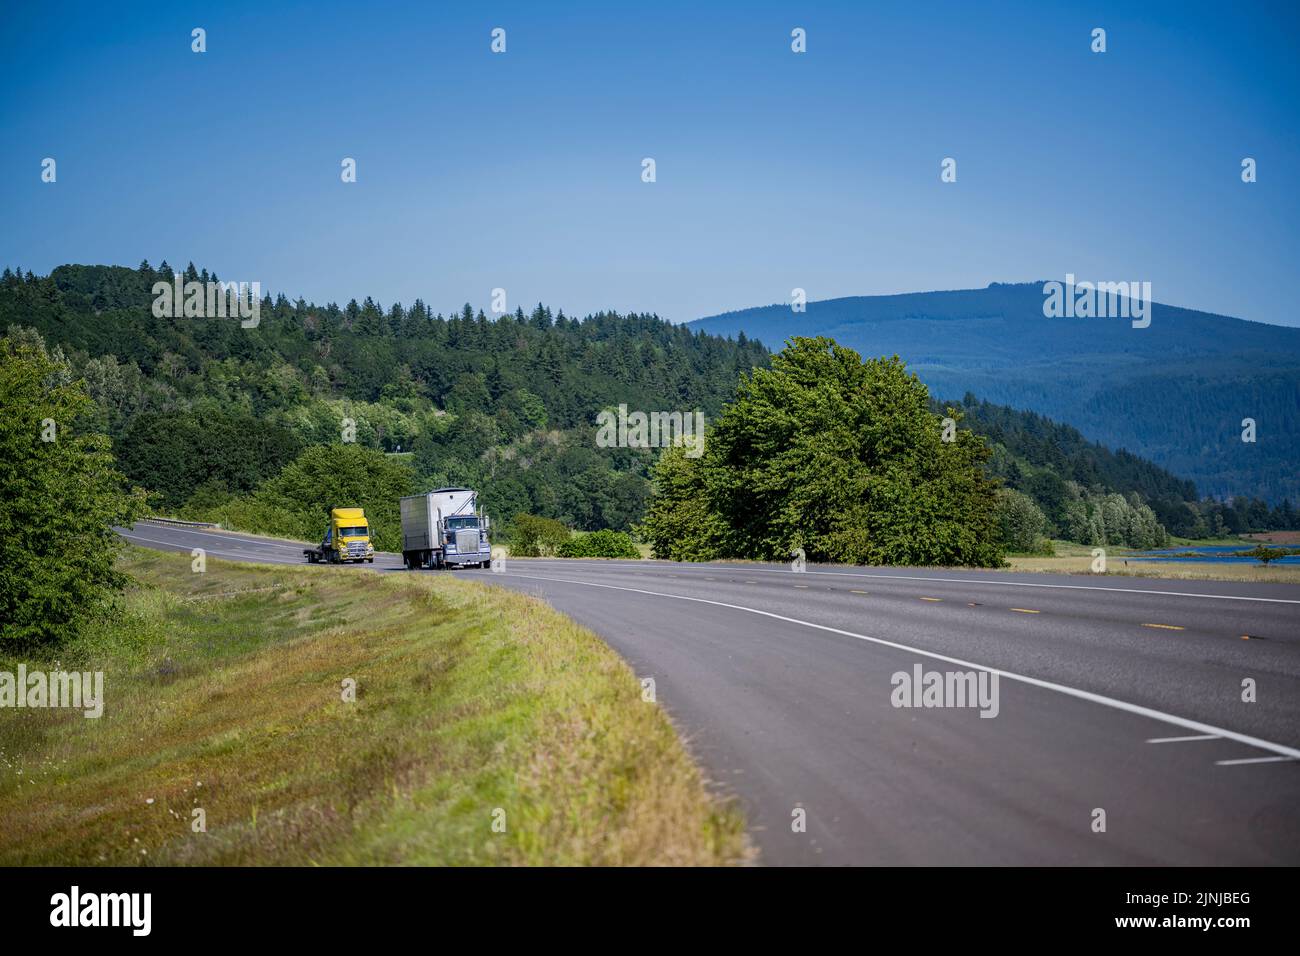 Industrial blue and yellow tow big rig semi trucks transporting commercial cargo in dry van and flat bed semi trailers running on narrow highway road Stock Photo